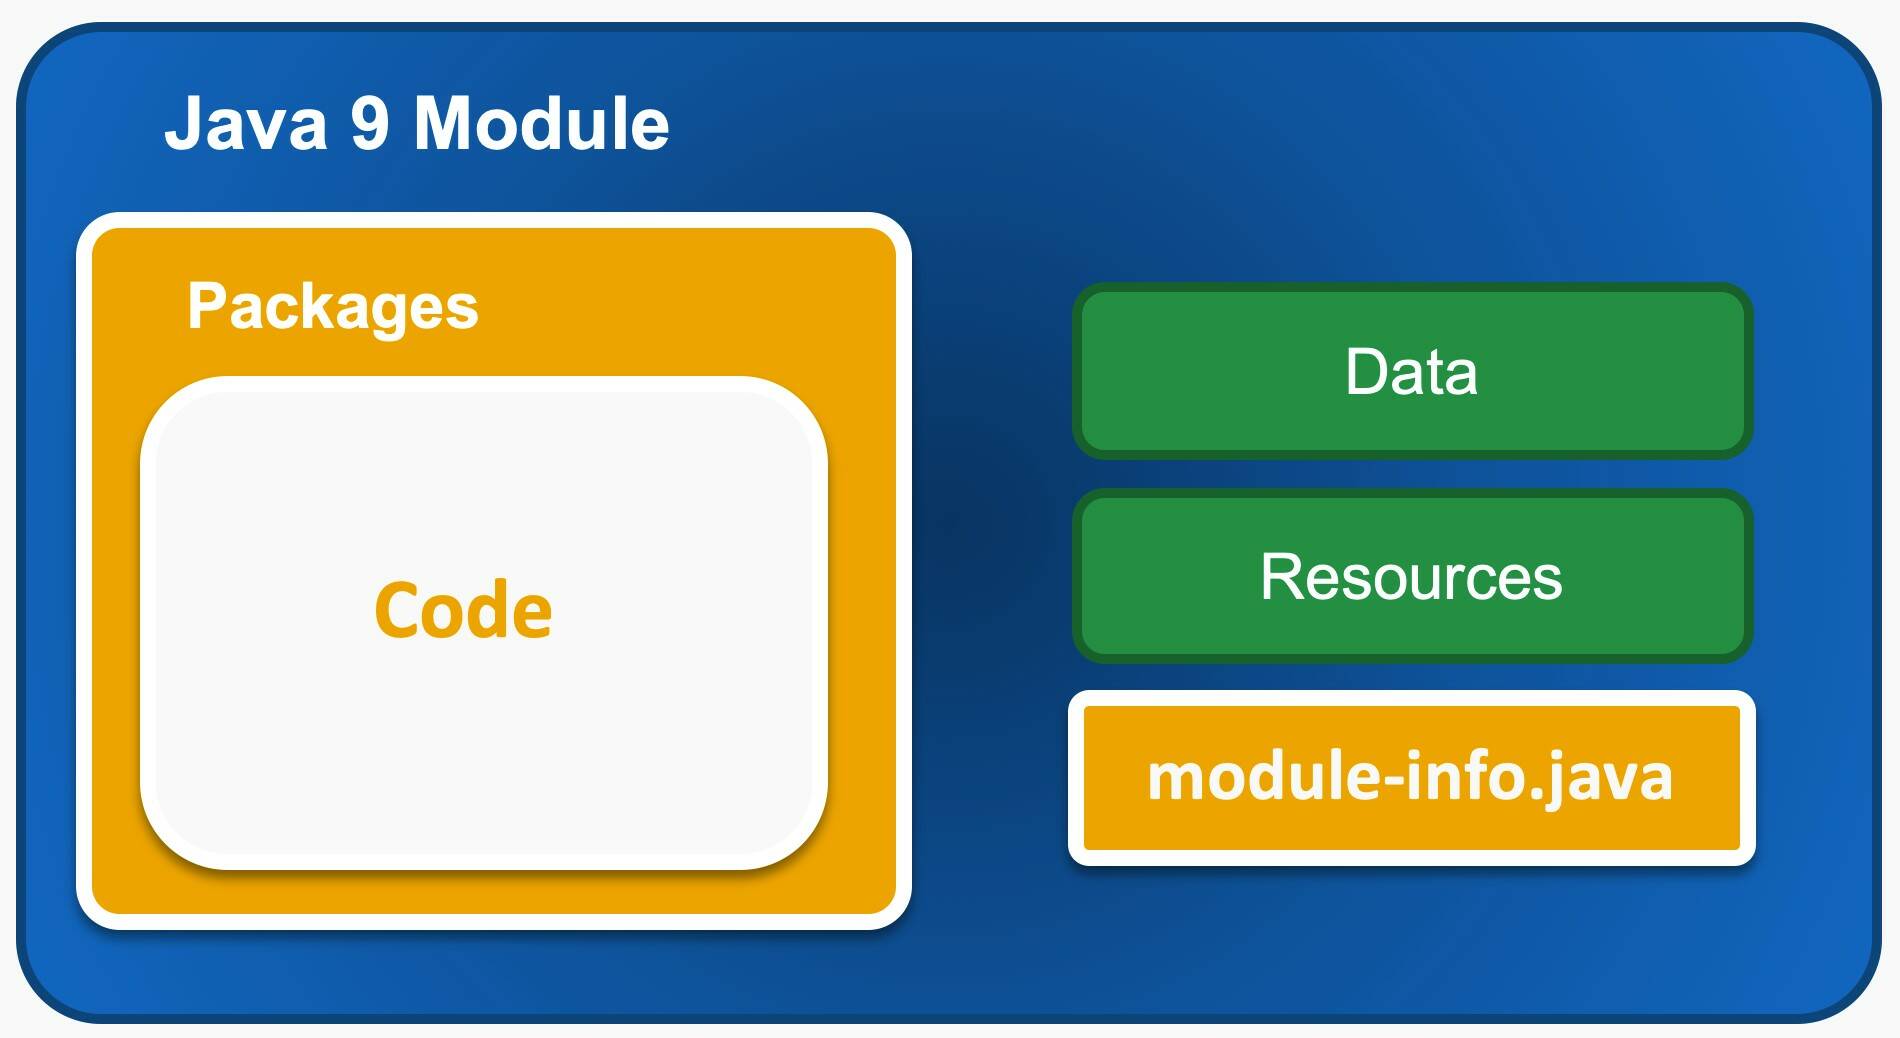 The contents of a Java 9 module